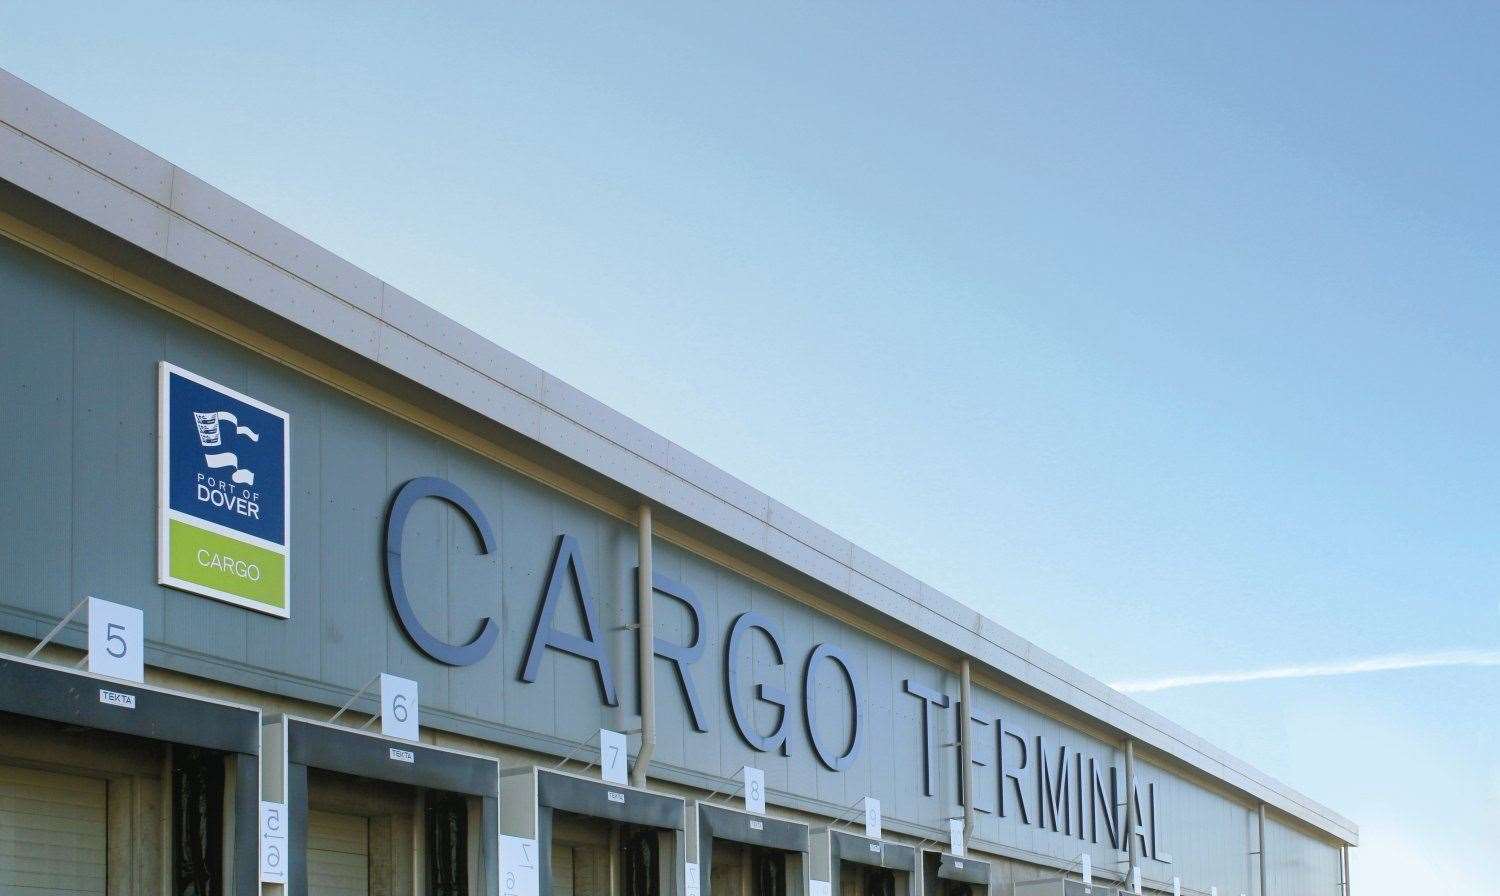 The terminal, on its first anniversary.